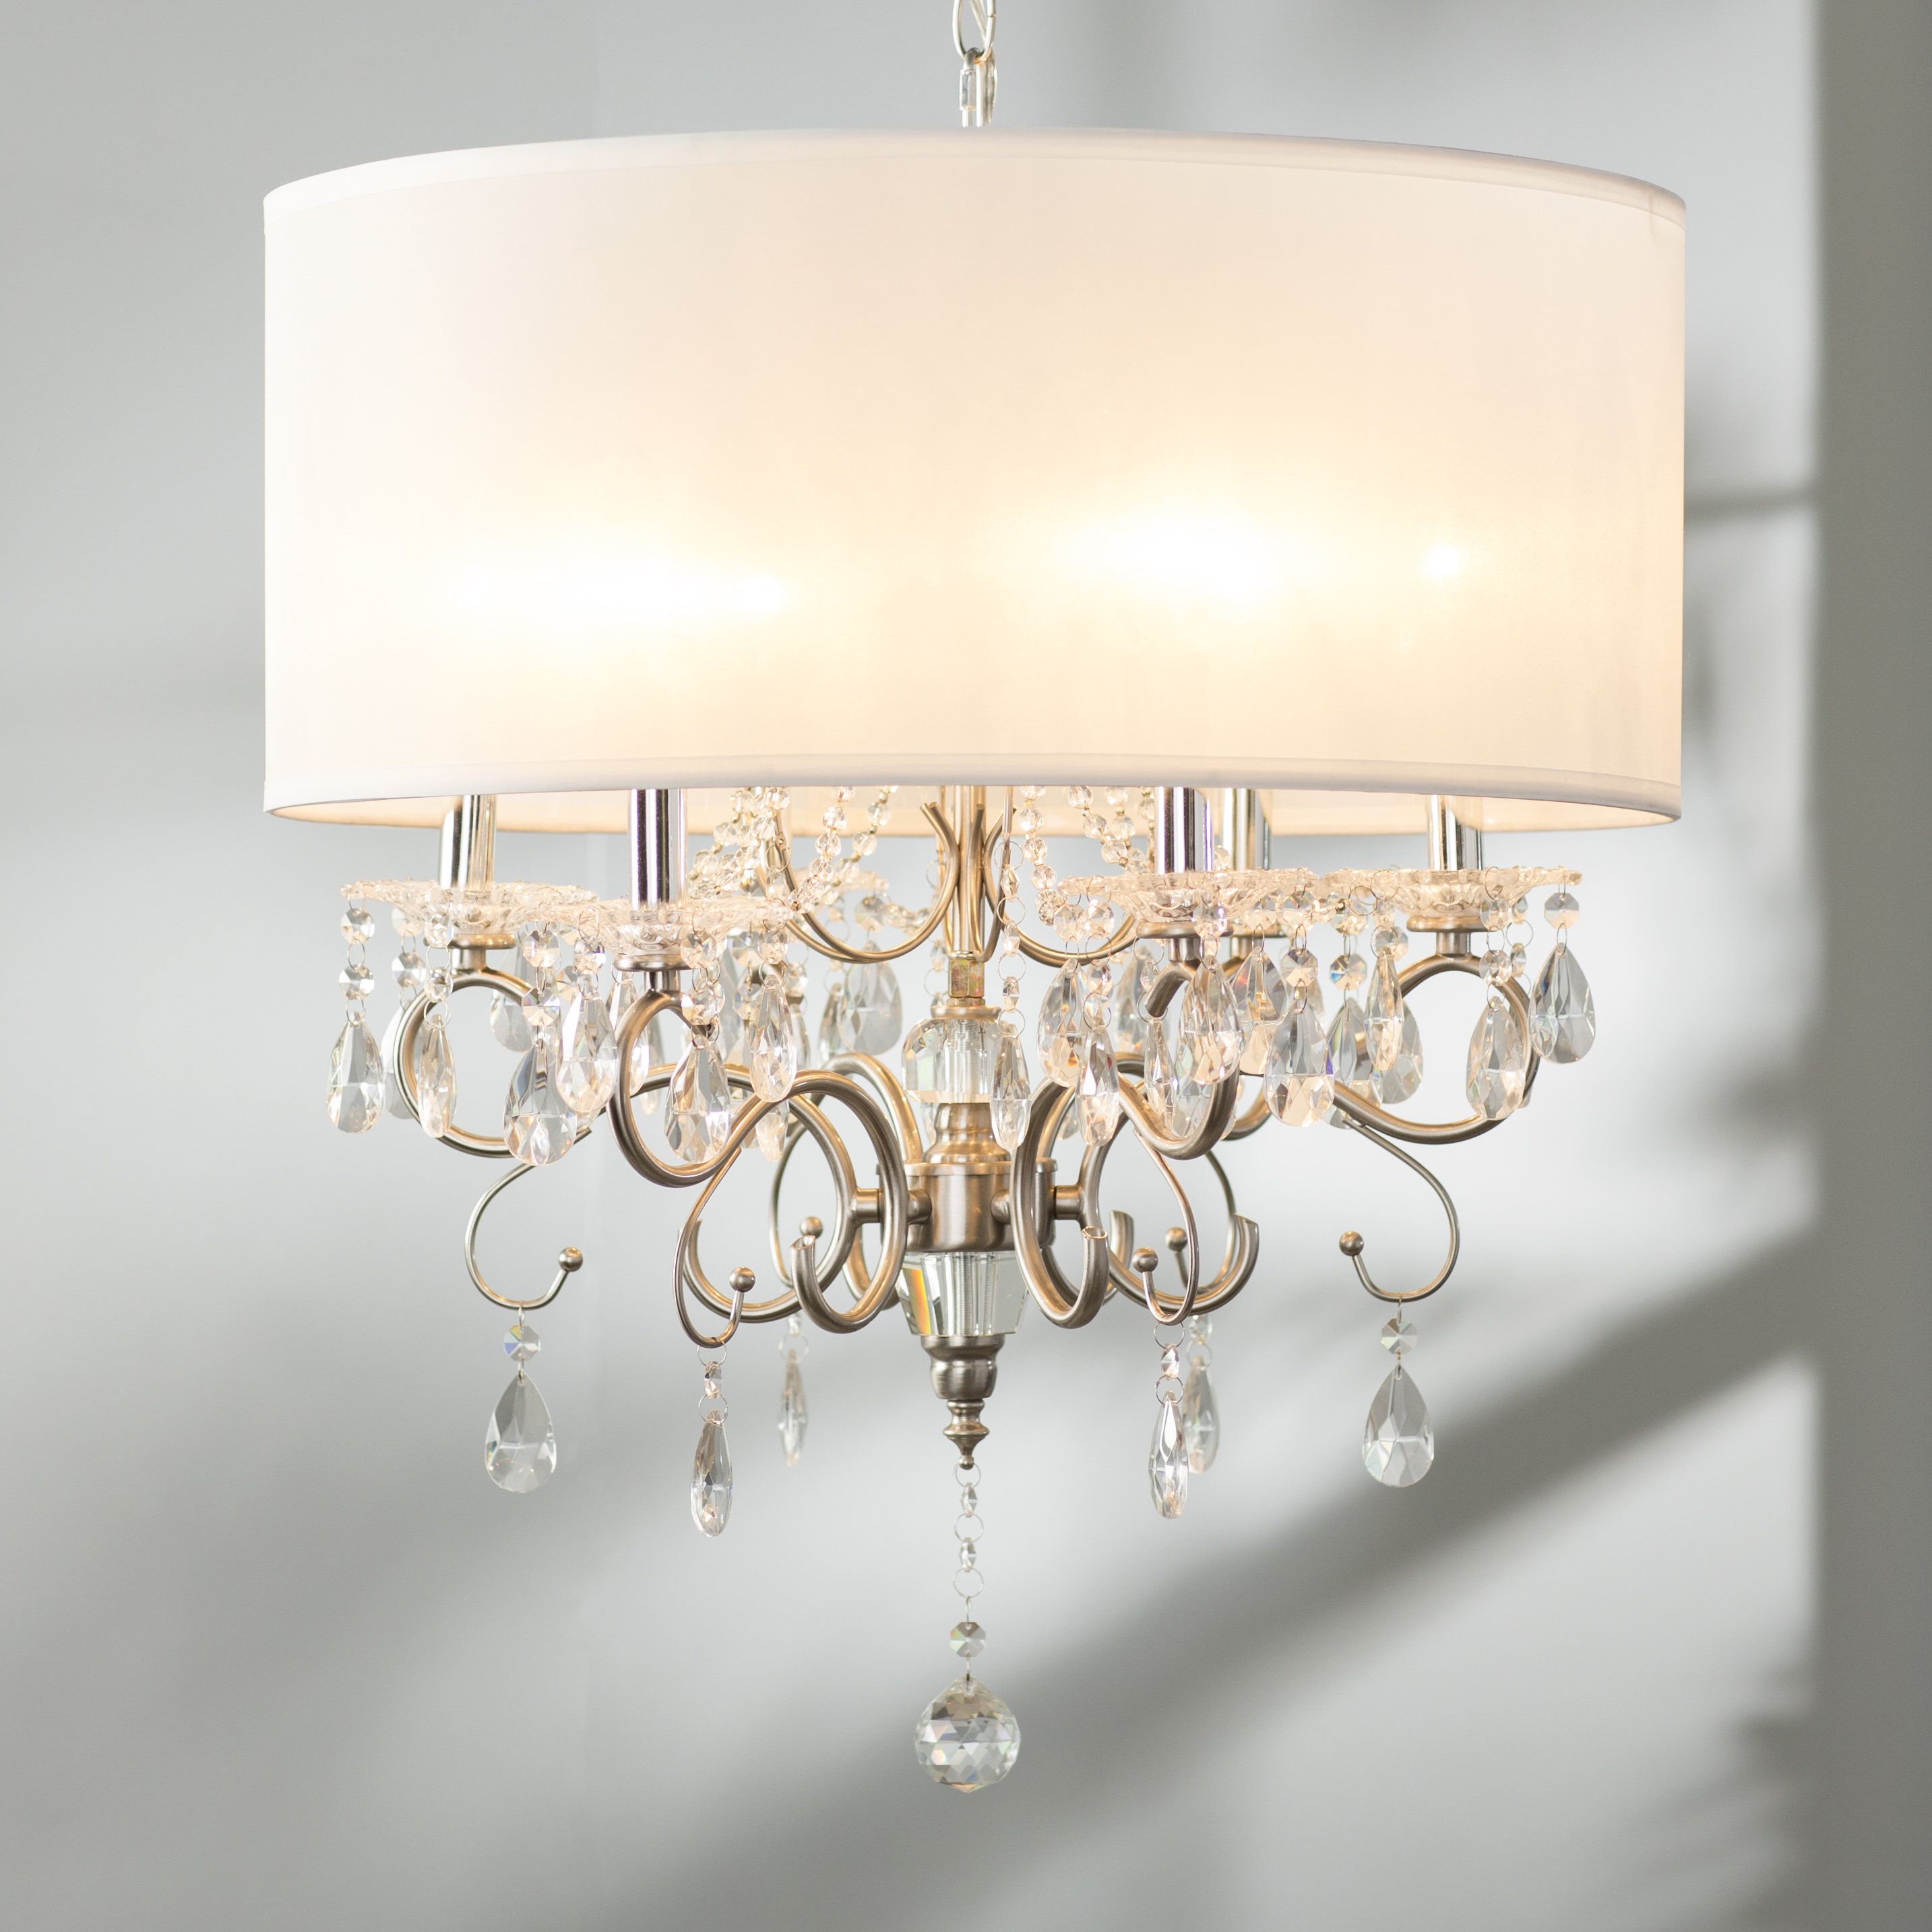 Willa Arlo Interiors Honiton 6 Light Chandelier & Reviews Pertaining To Abel 5 Light Drum Chandeliers (View 30 of 30)